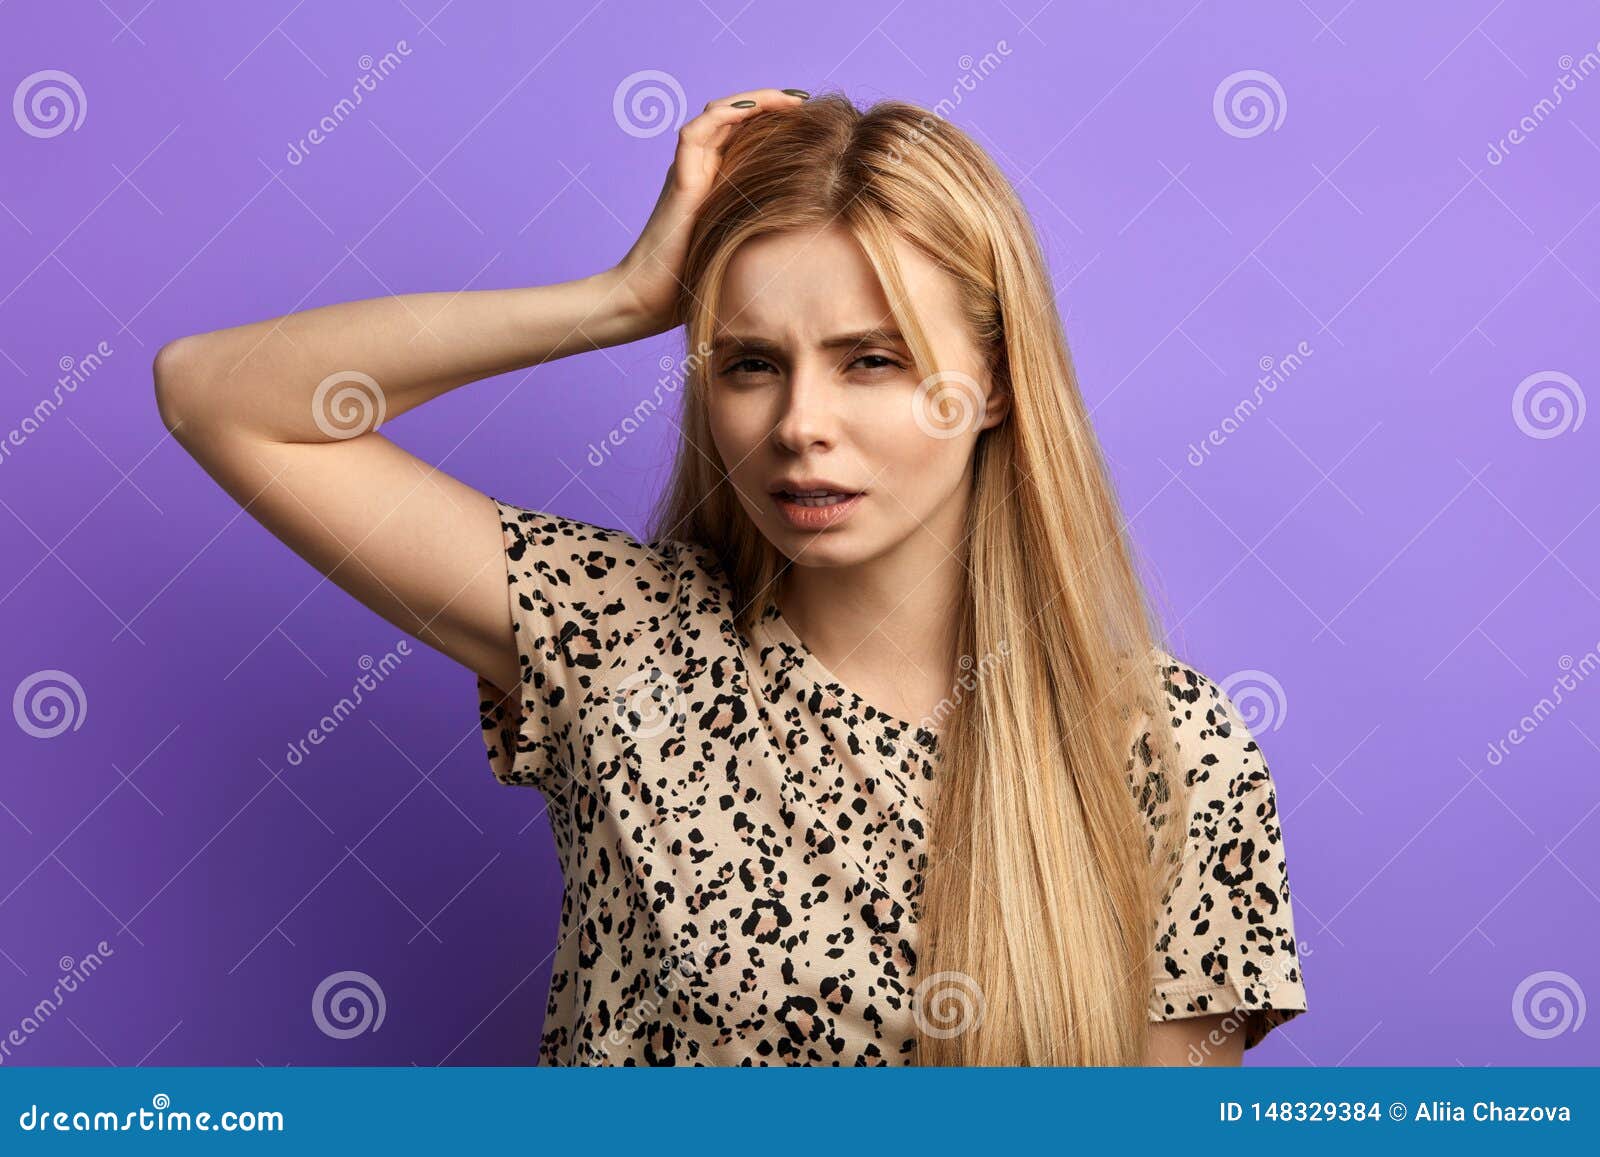 Young Puzzled Woman Scratching Her Head Thinking Daydreaming Stock